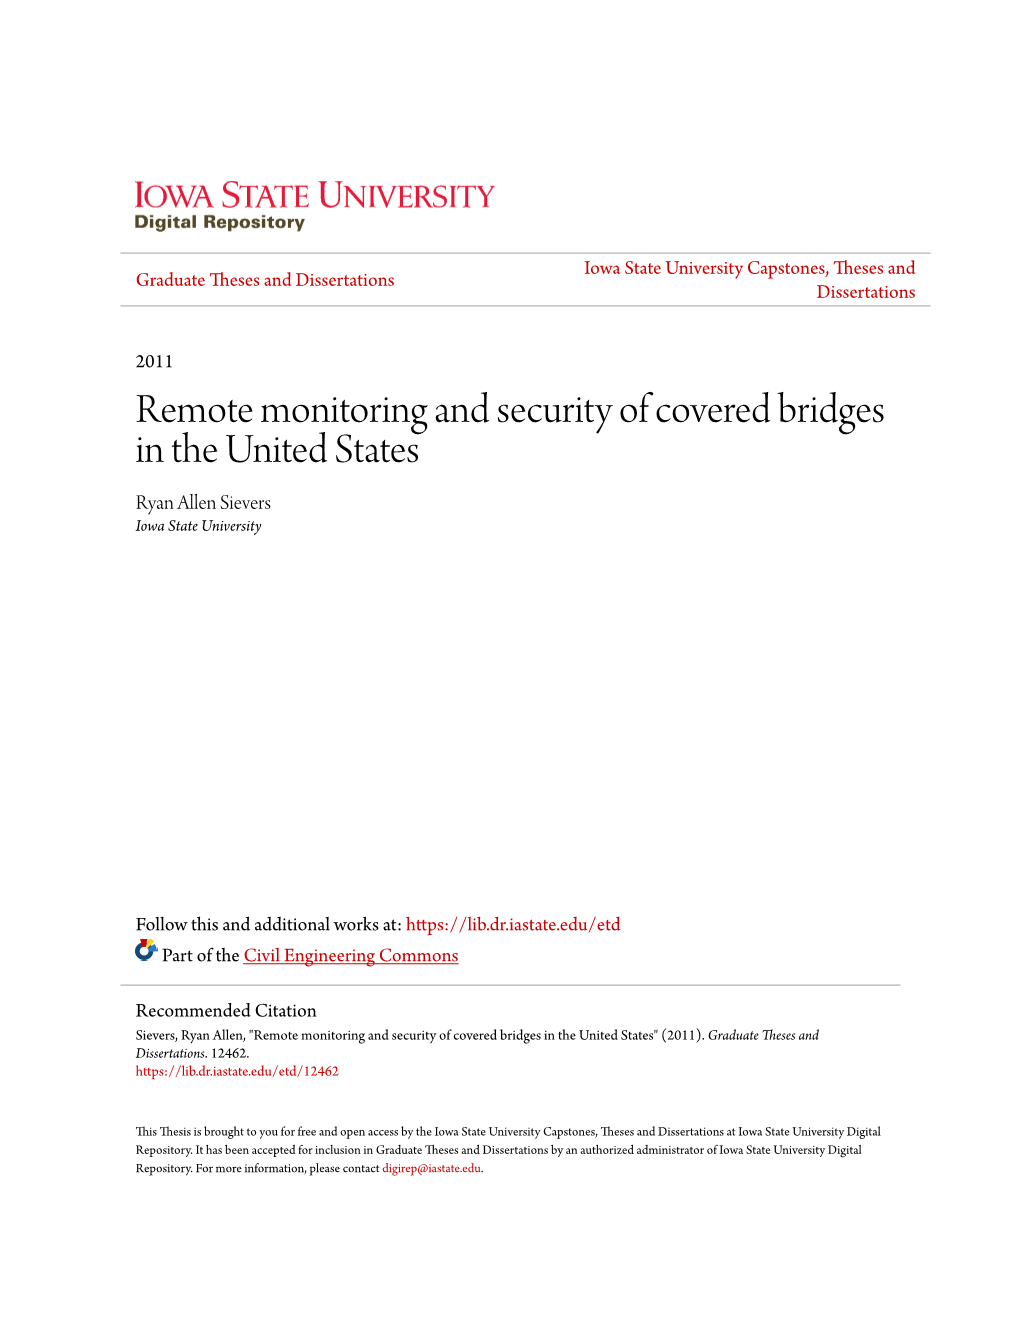 Remote Monitoring and Security of Covered Bridges in the United States Ryan Allen Sievers Iowa State University